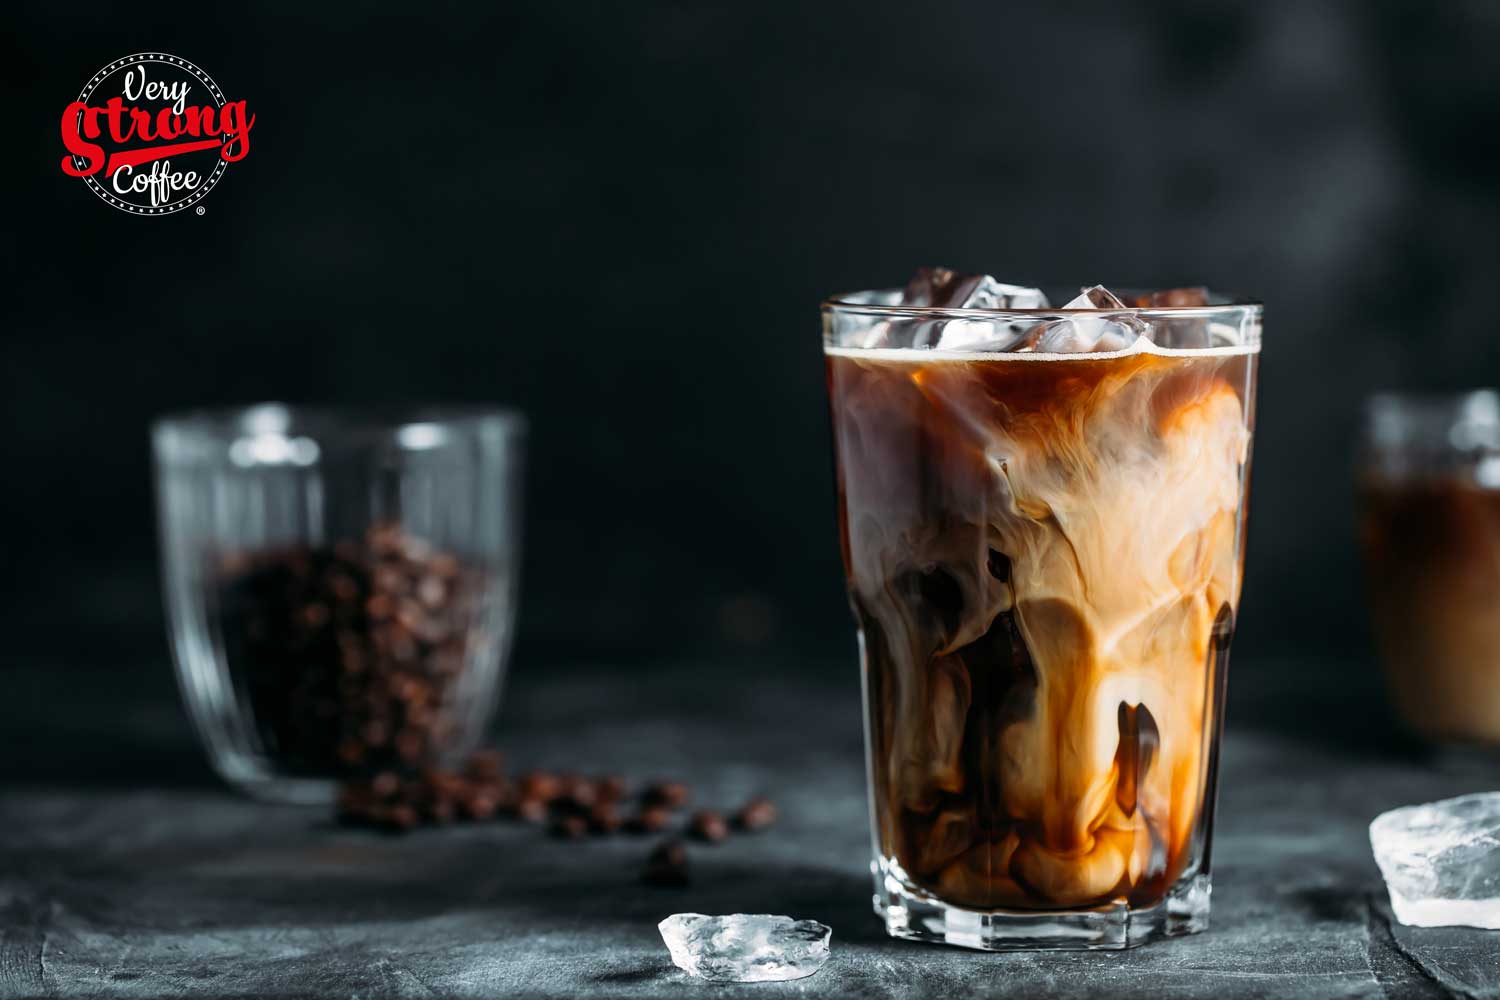 How to make iced coffee at home?